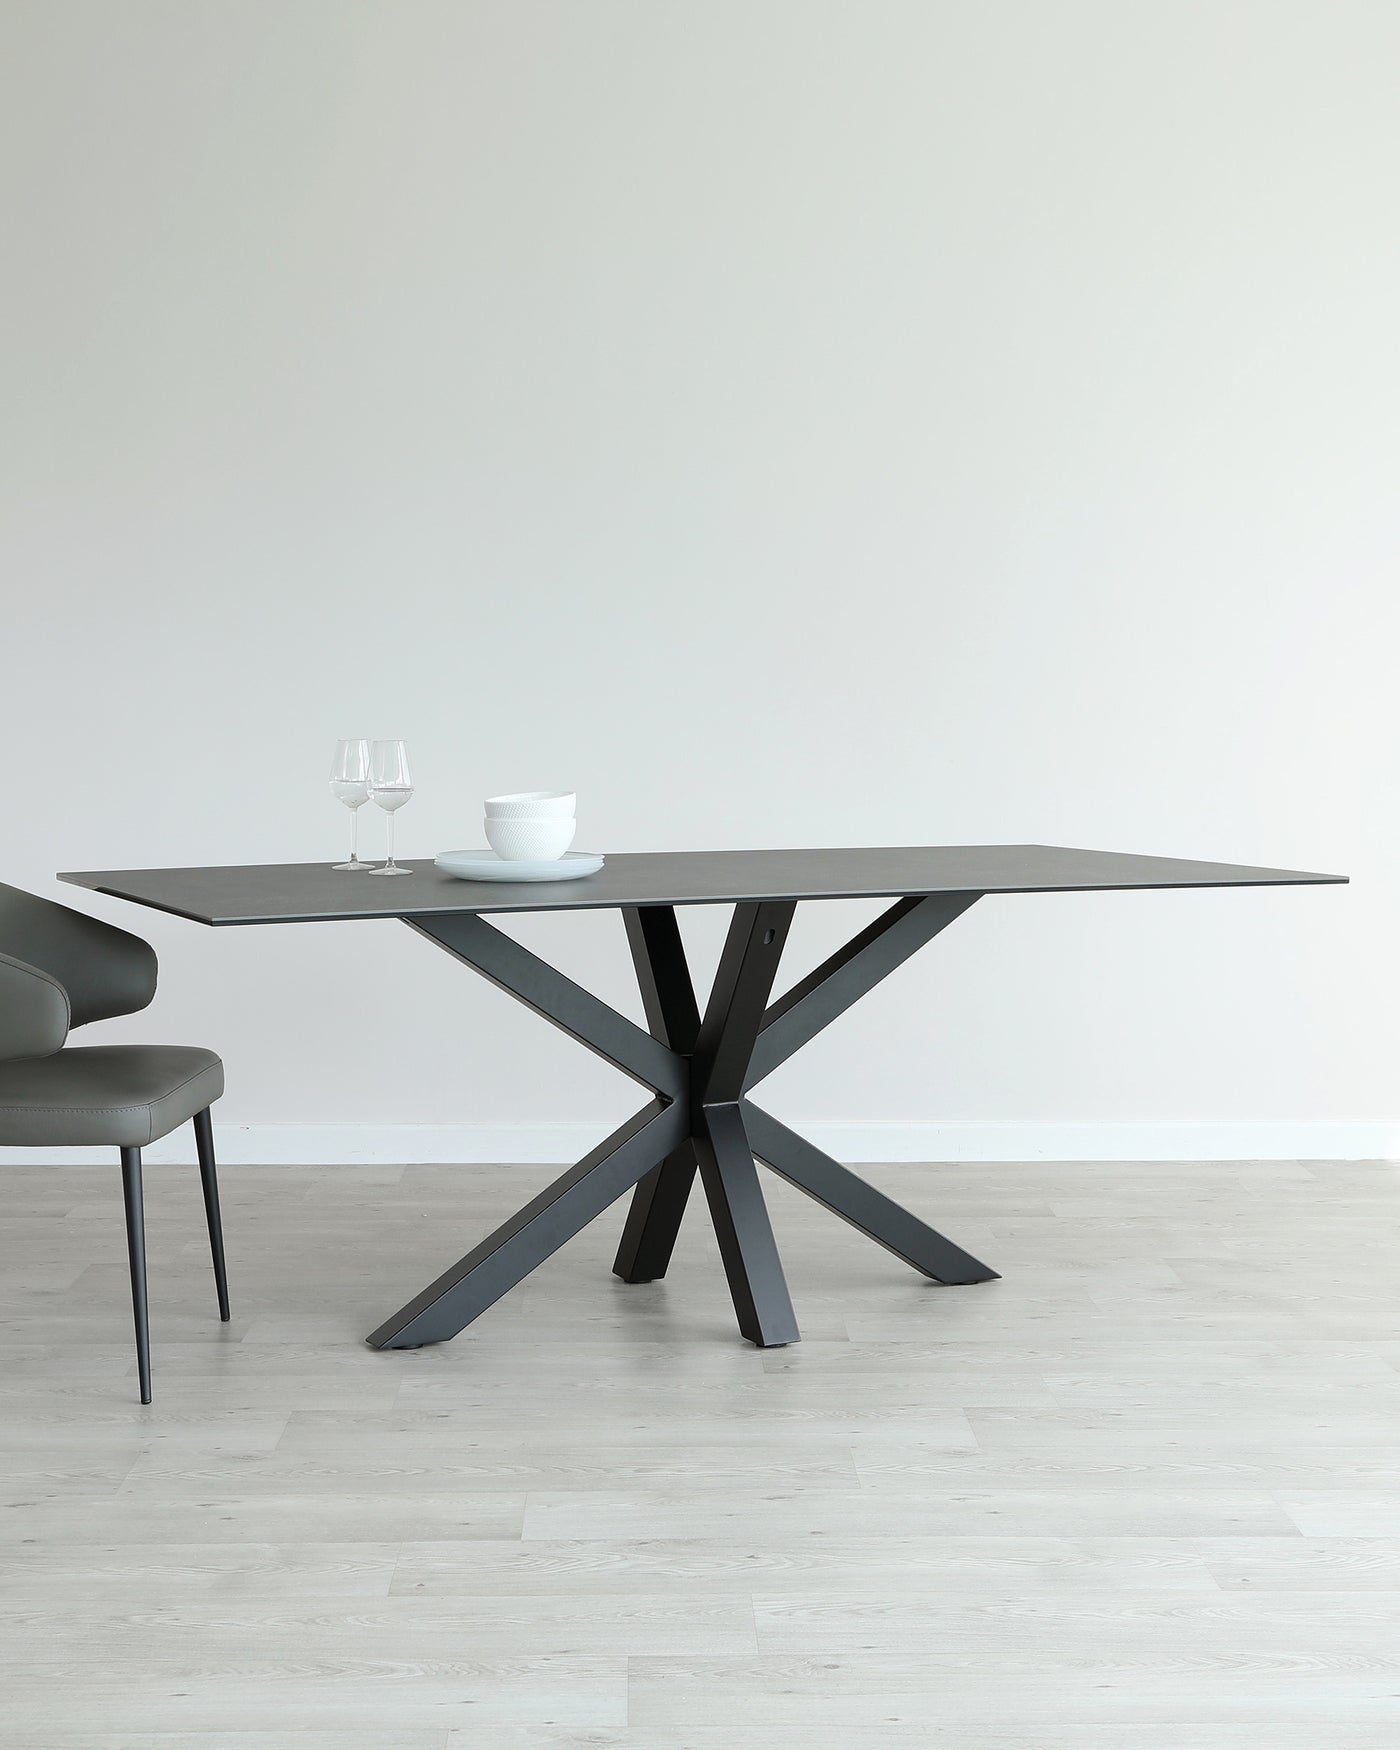 Modern minimalist dining set including a rectangular dark table with an angled cross-leg design and a matching curved bench-style seat with slender legs, set on a light wood floor against a clean white wall, adorned with simple white dinnerware and clear wine glasses.